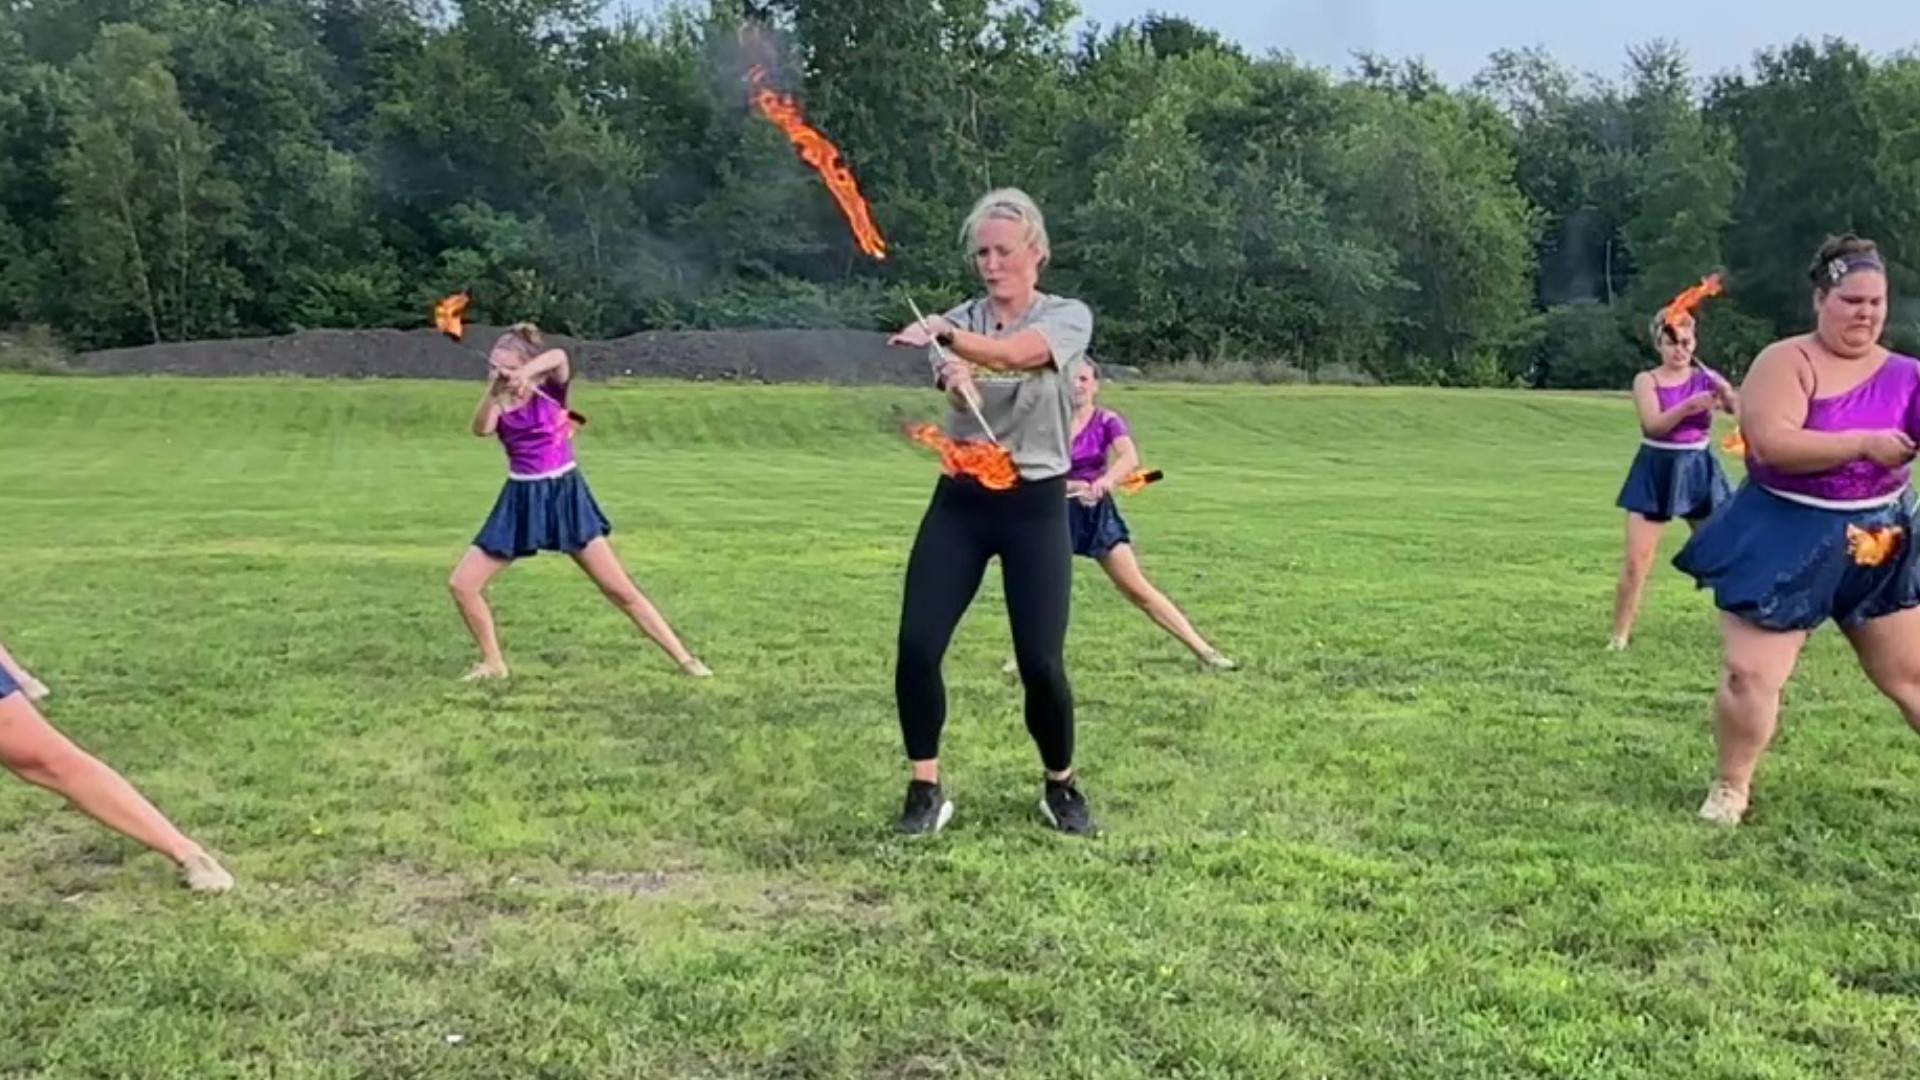 Newswatch 16's Chelsea Strub got some hot tips on the fiery fun.